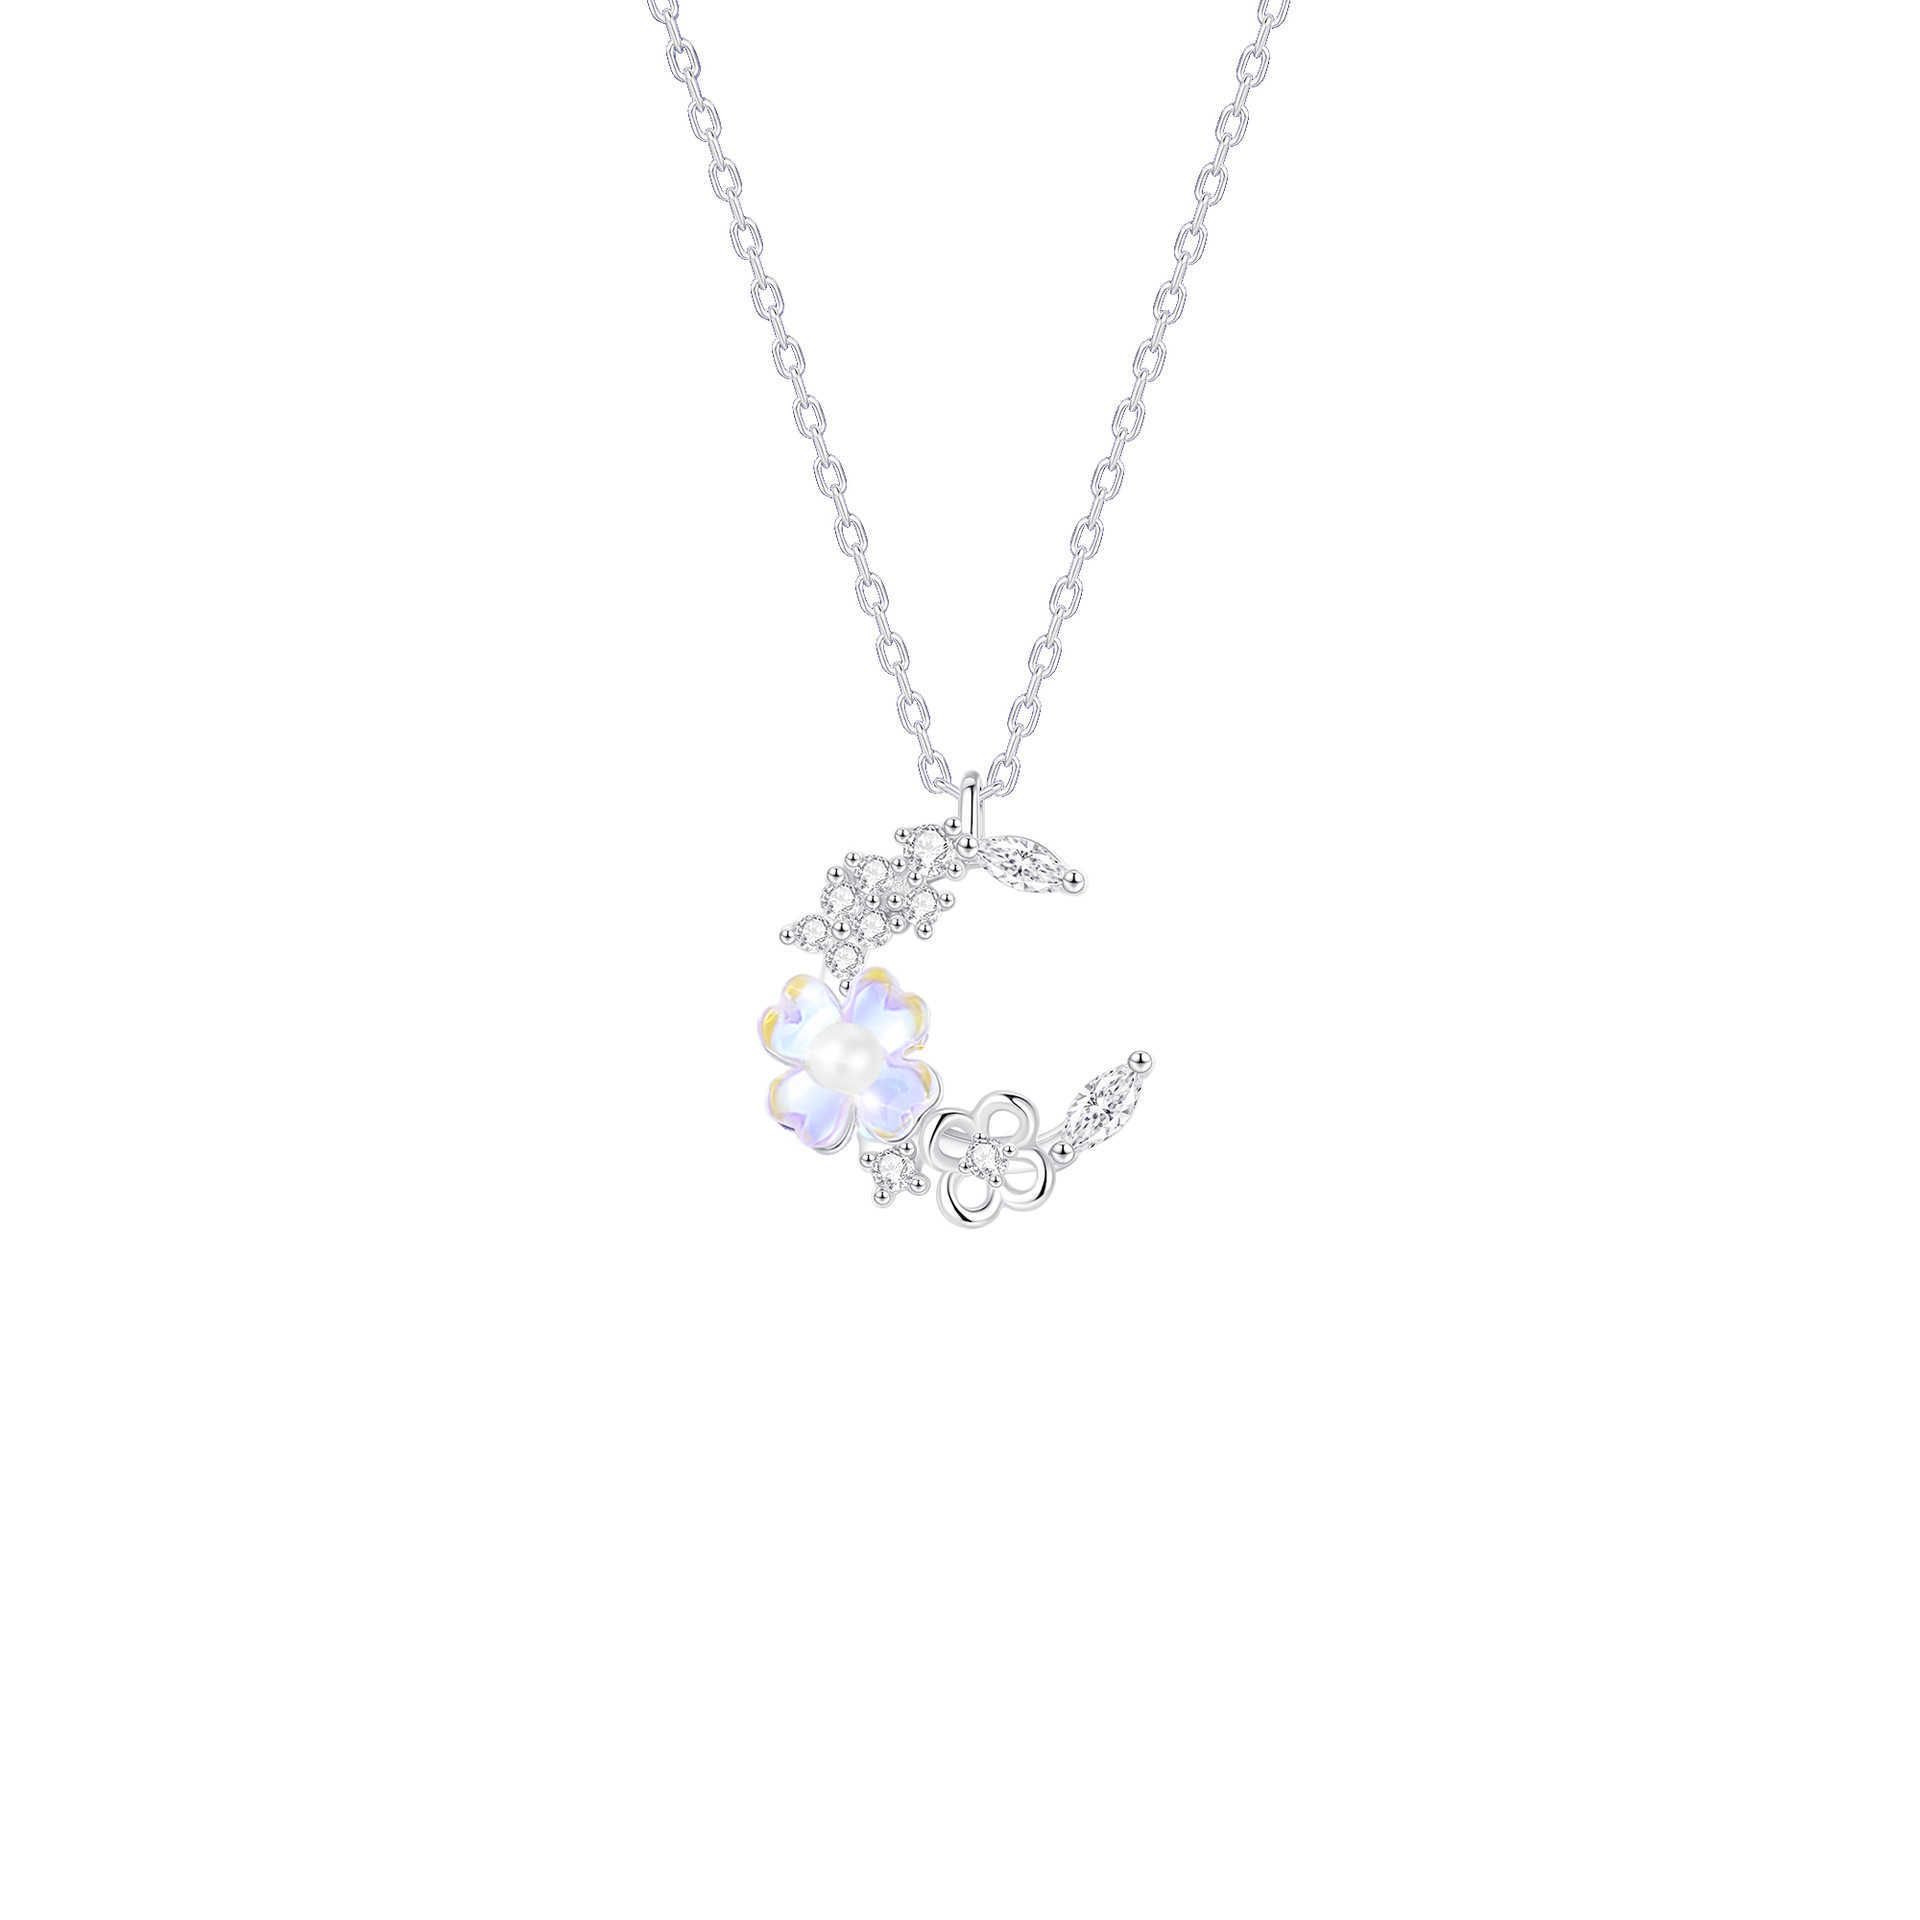 W699 Collier Lucky Moonlight-925 Silver